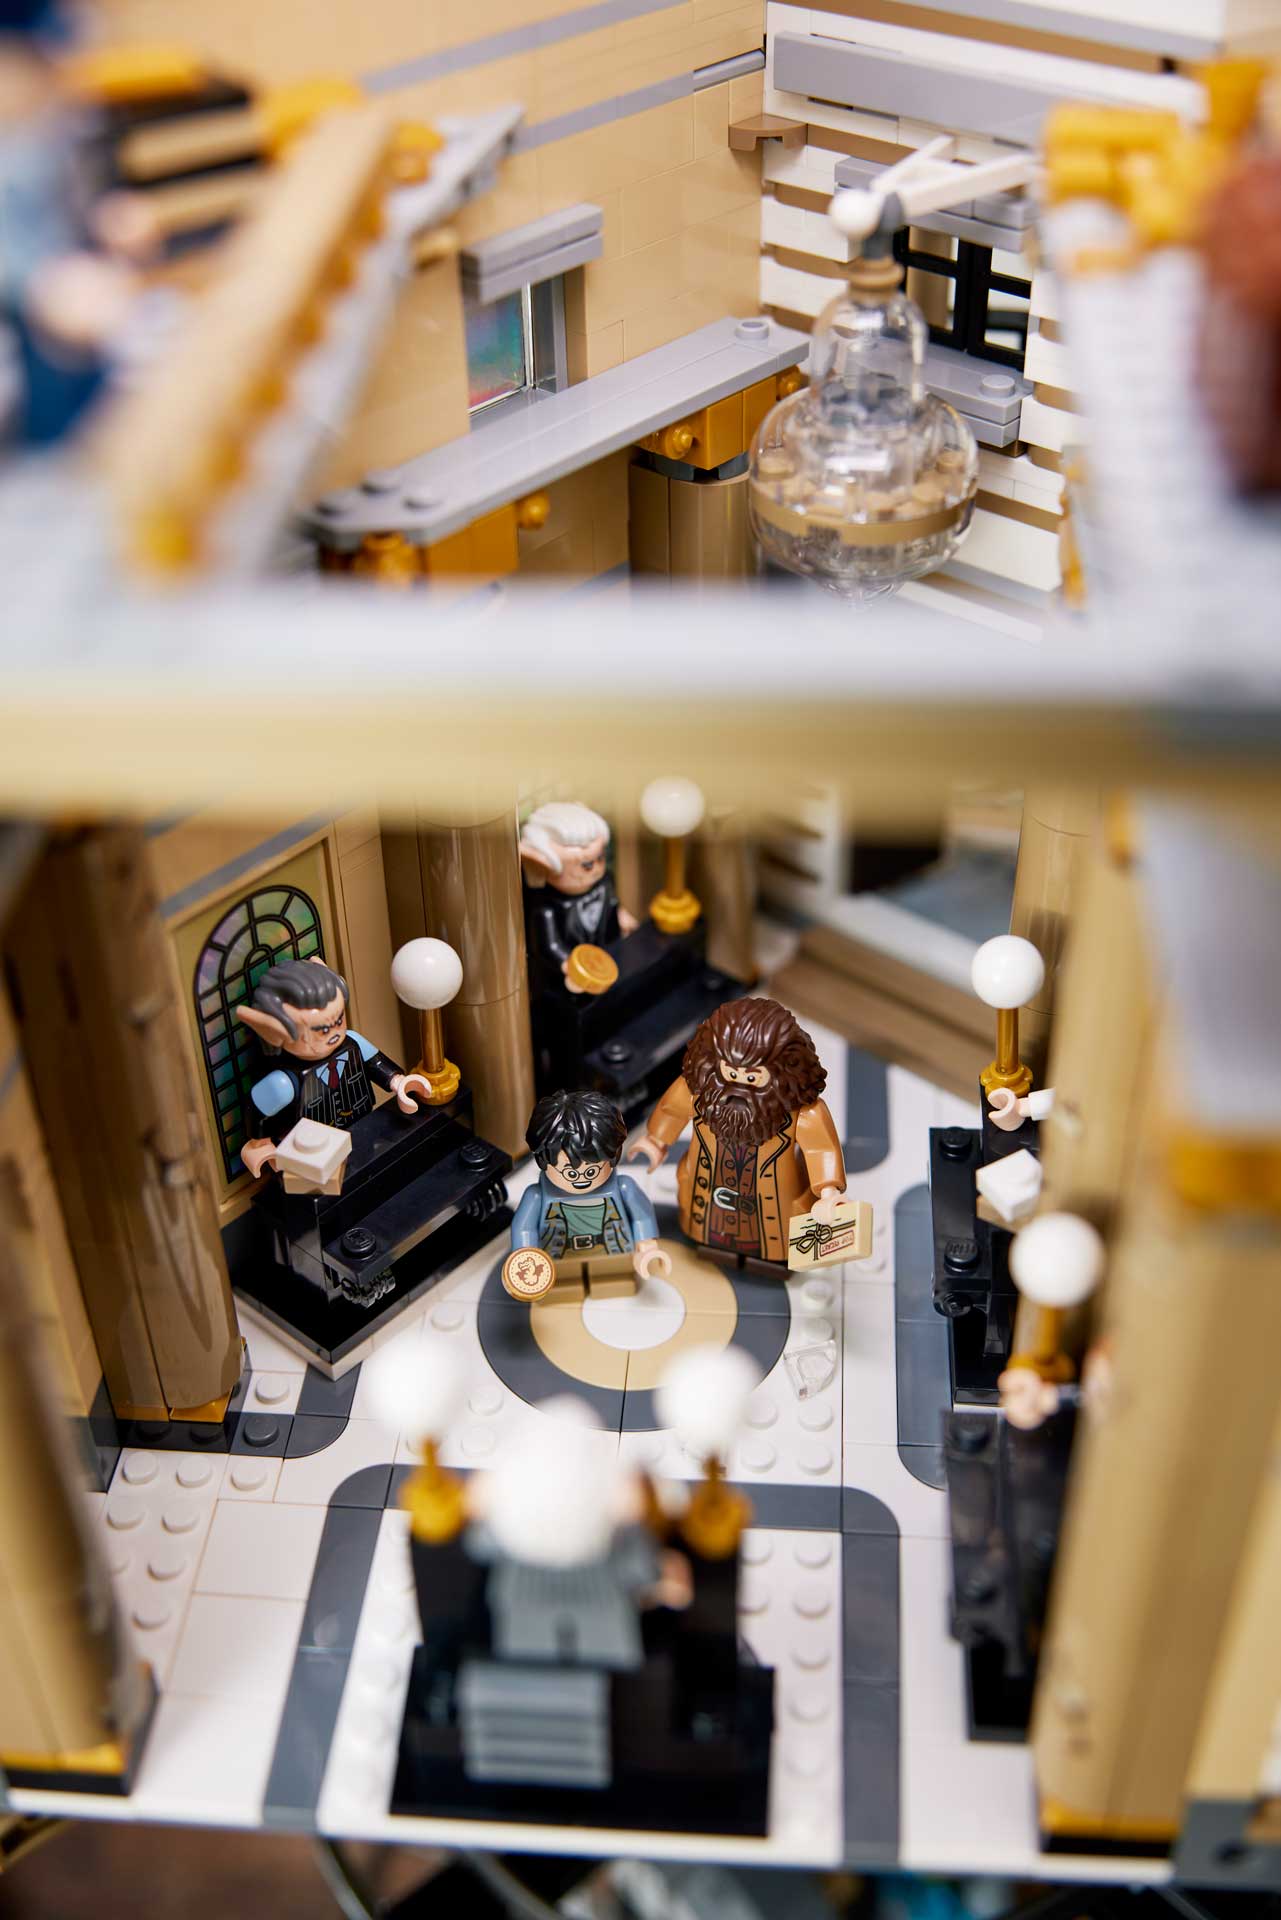 The Lego Harry Potter Gringotts bank set, seen from above.